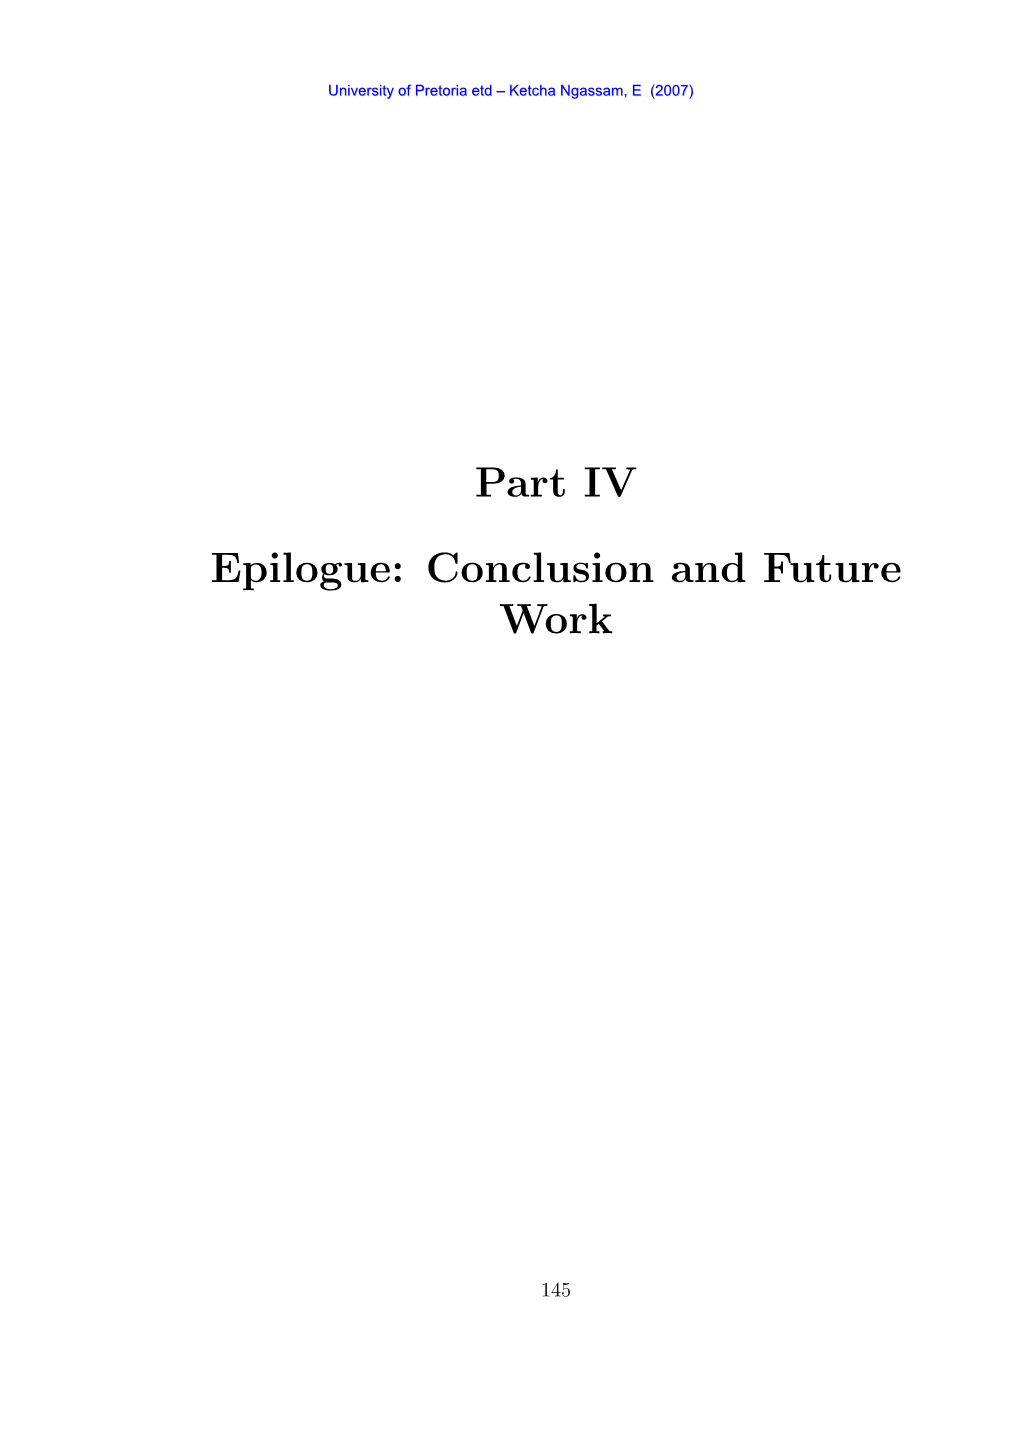 Part IV Epilogue: Conclusion and Future Work